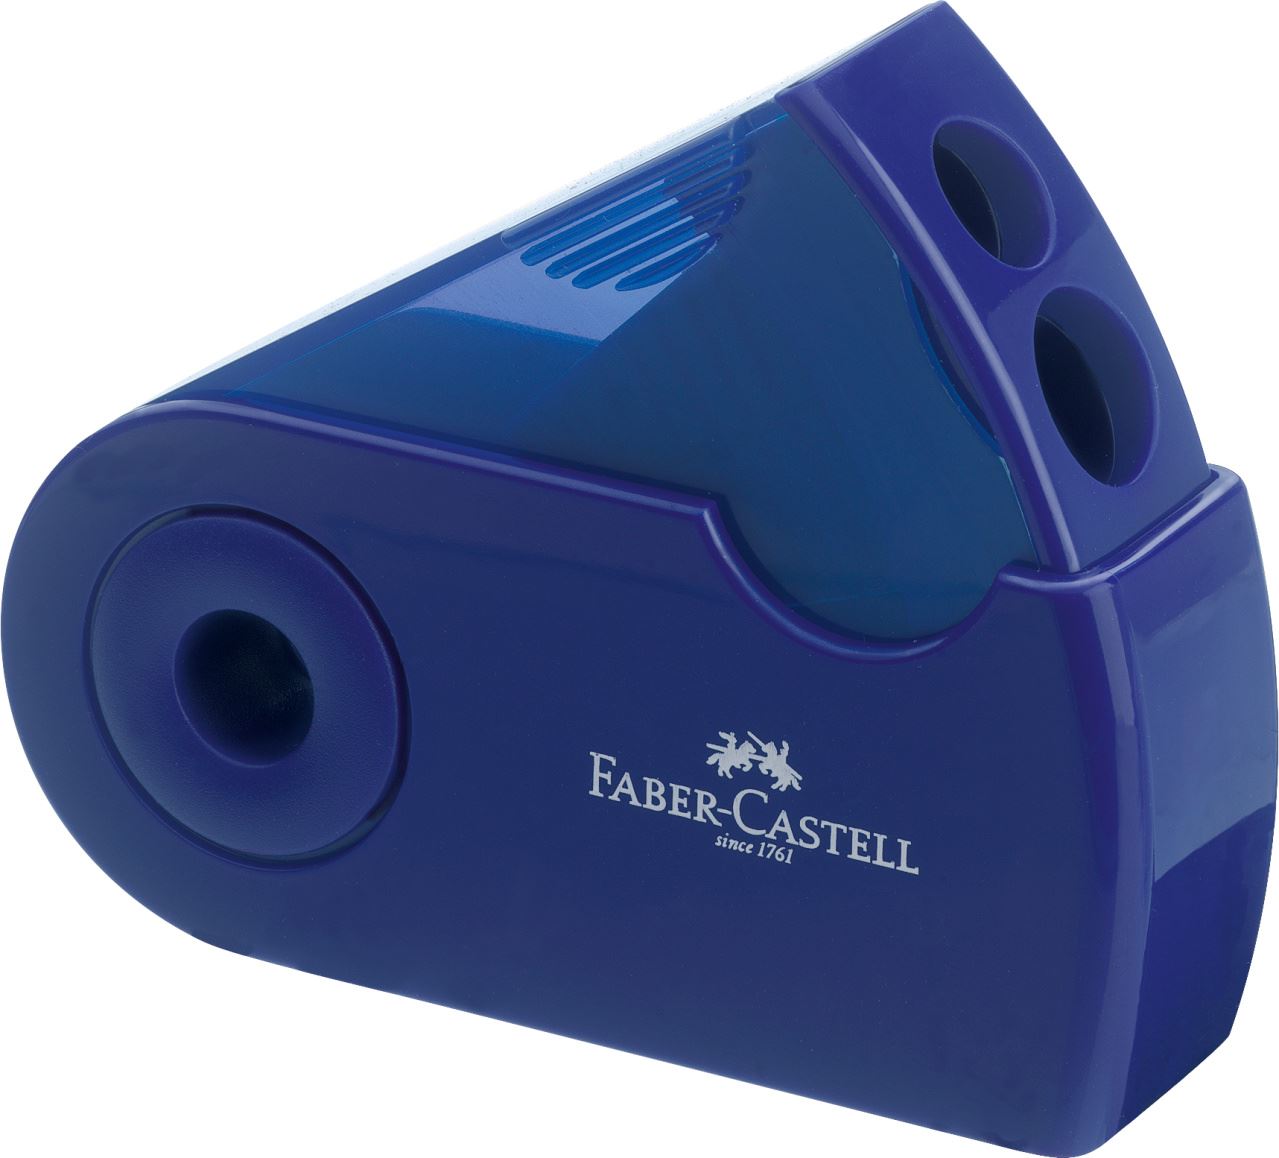 Faber-Castell - Sleeve twin sharpening box, red/blue, sorted